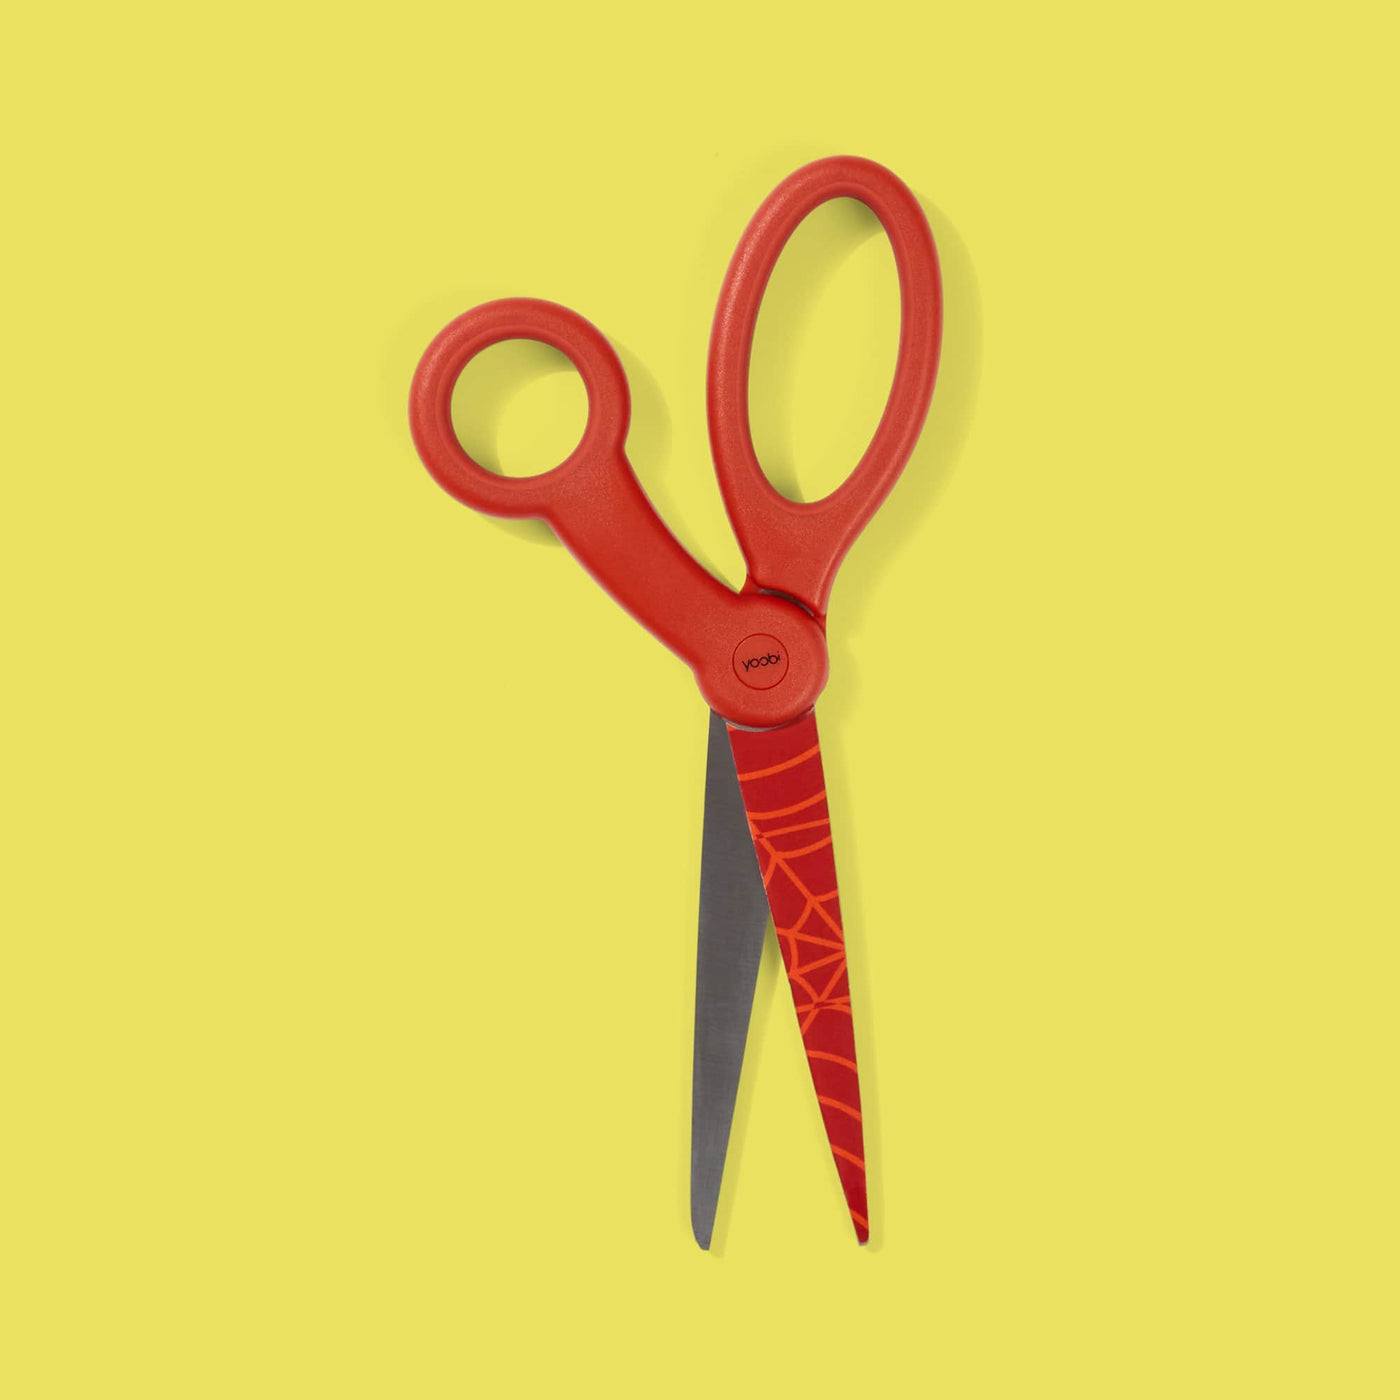 red scissors with red Spider-Man web design on top blade